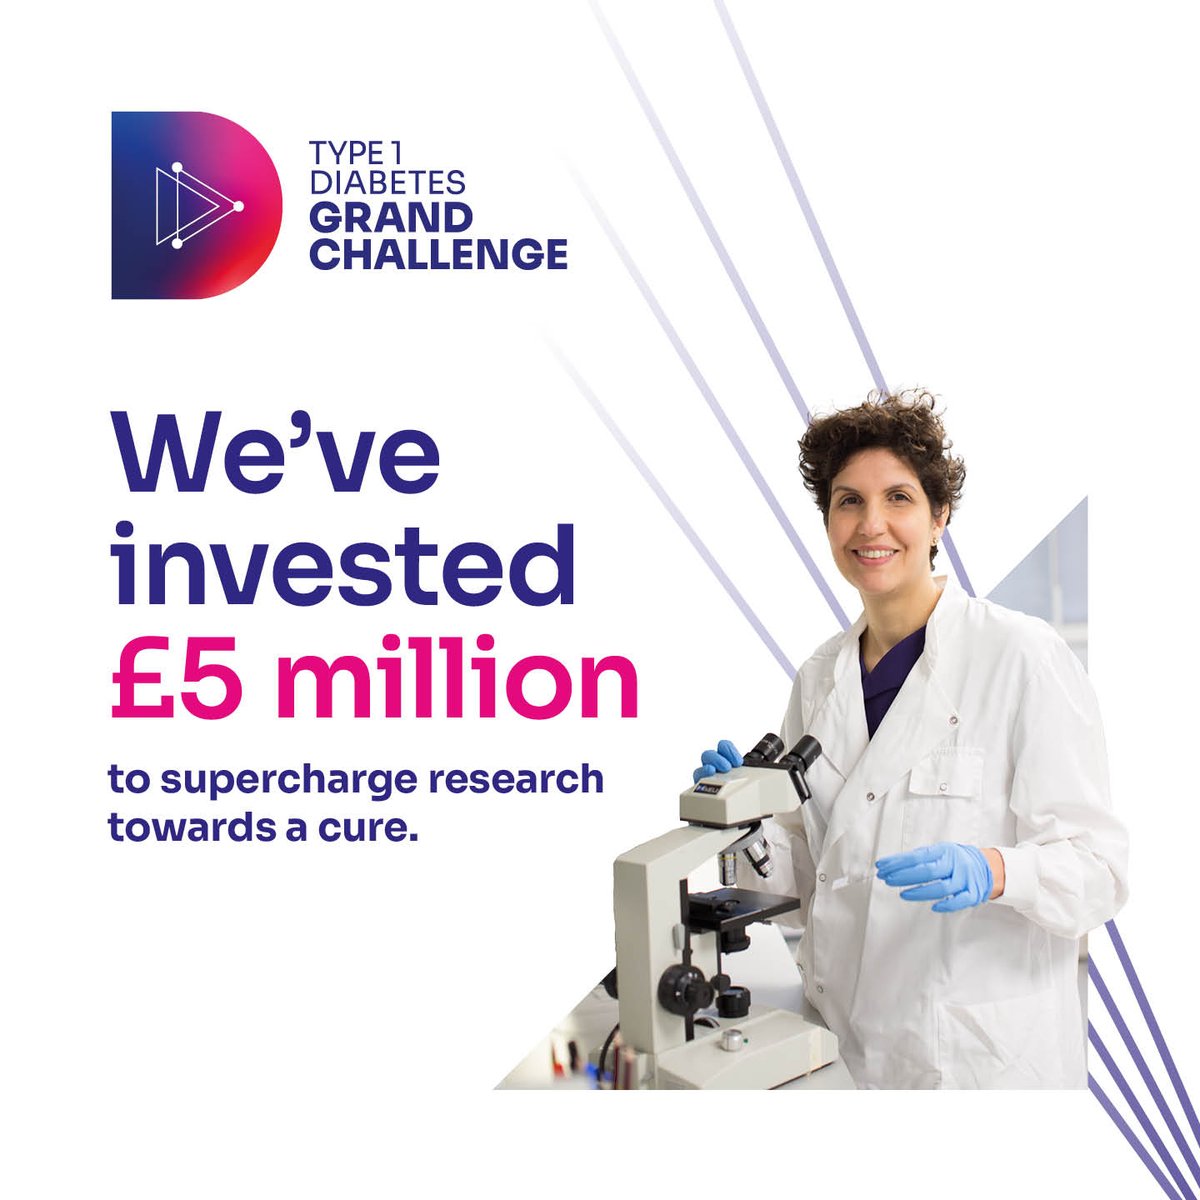 🤩 We’re excited to reveal the first research projects funded by the #Type1DiabetesGrandChallenge, our partnership with @stevemorganfdn & @DiabetesUK!

£5 million will fund 3 exceptional scientists to drive radical change for people with #Type1Diabetes.

Let's meet the team 👇1/5